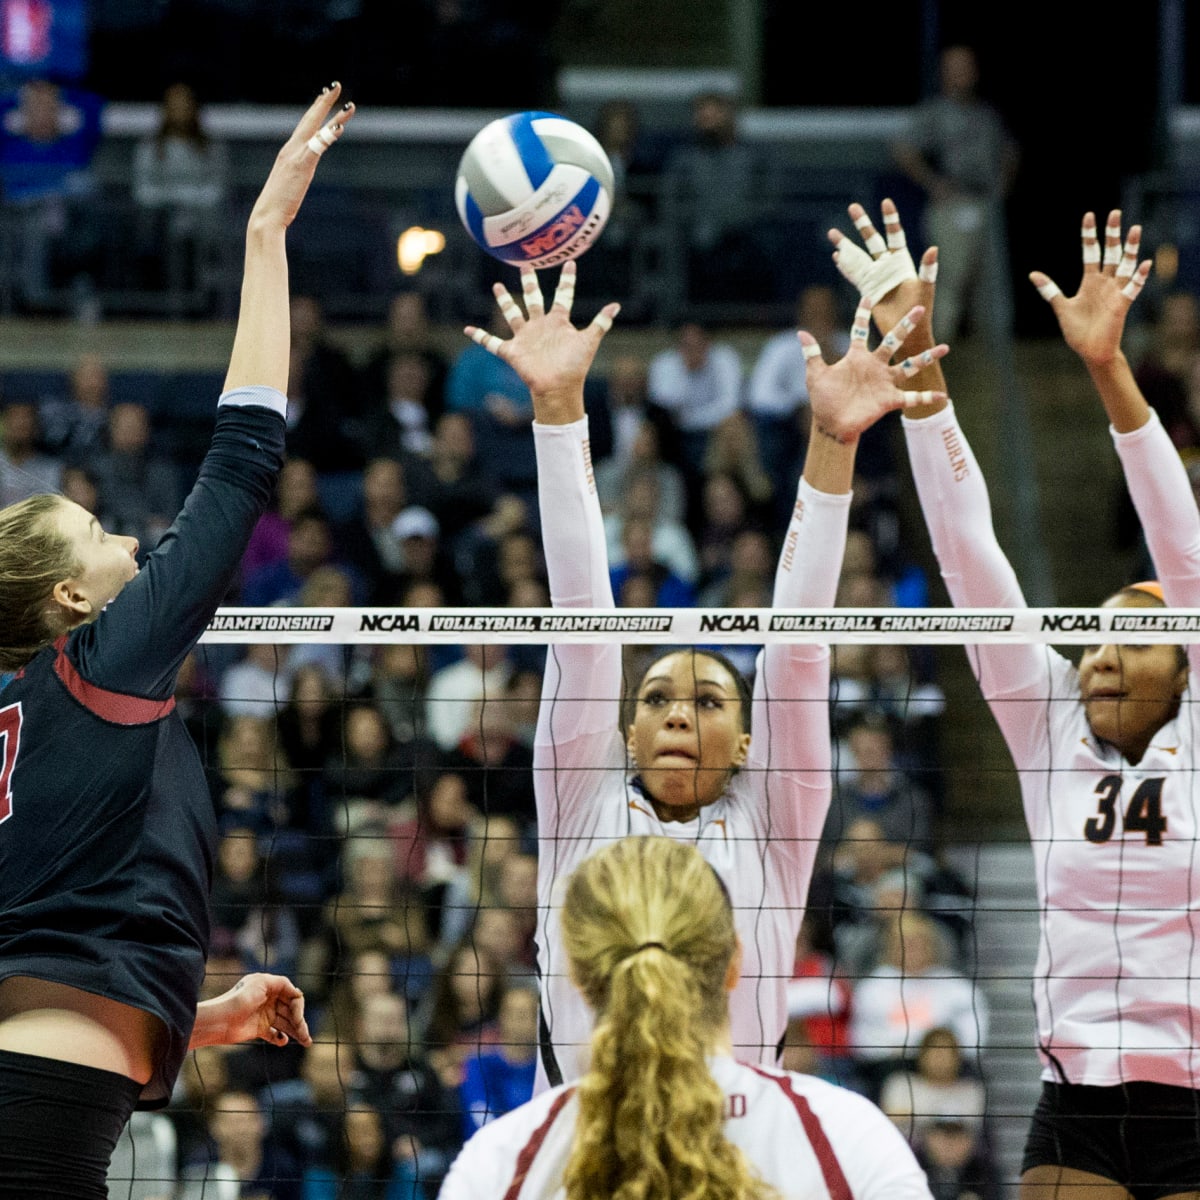 Wisconsin at Florida Free Live Stream Womens College Volleyball - How to Watch and Stream Major League and College Sports